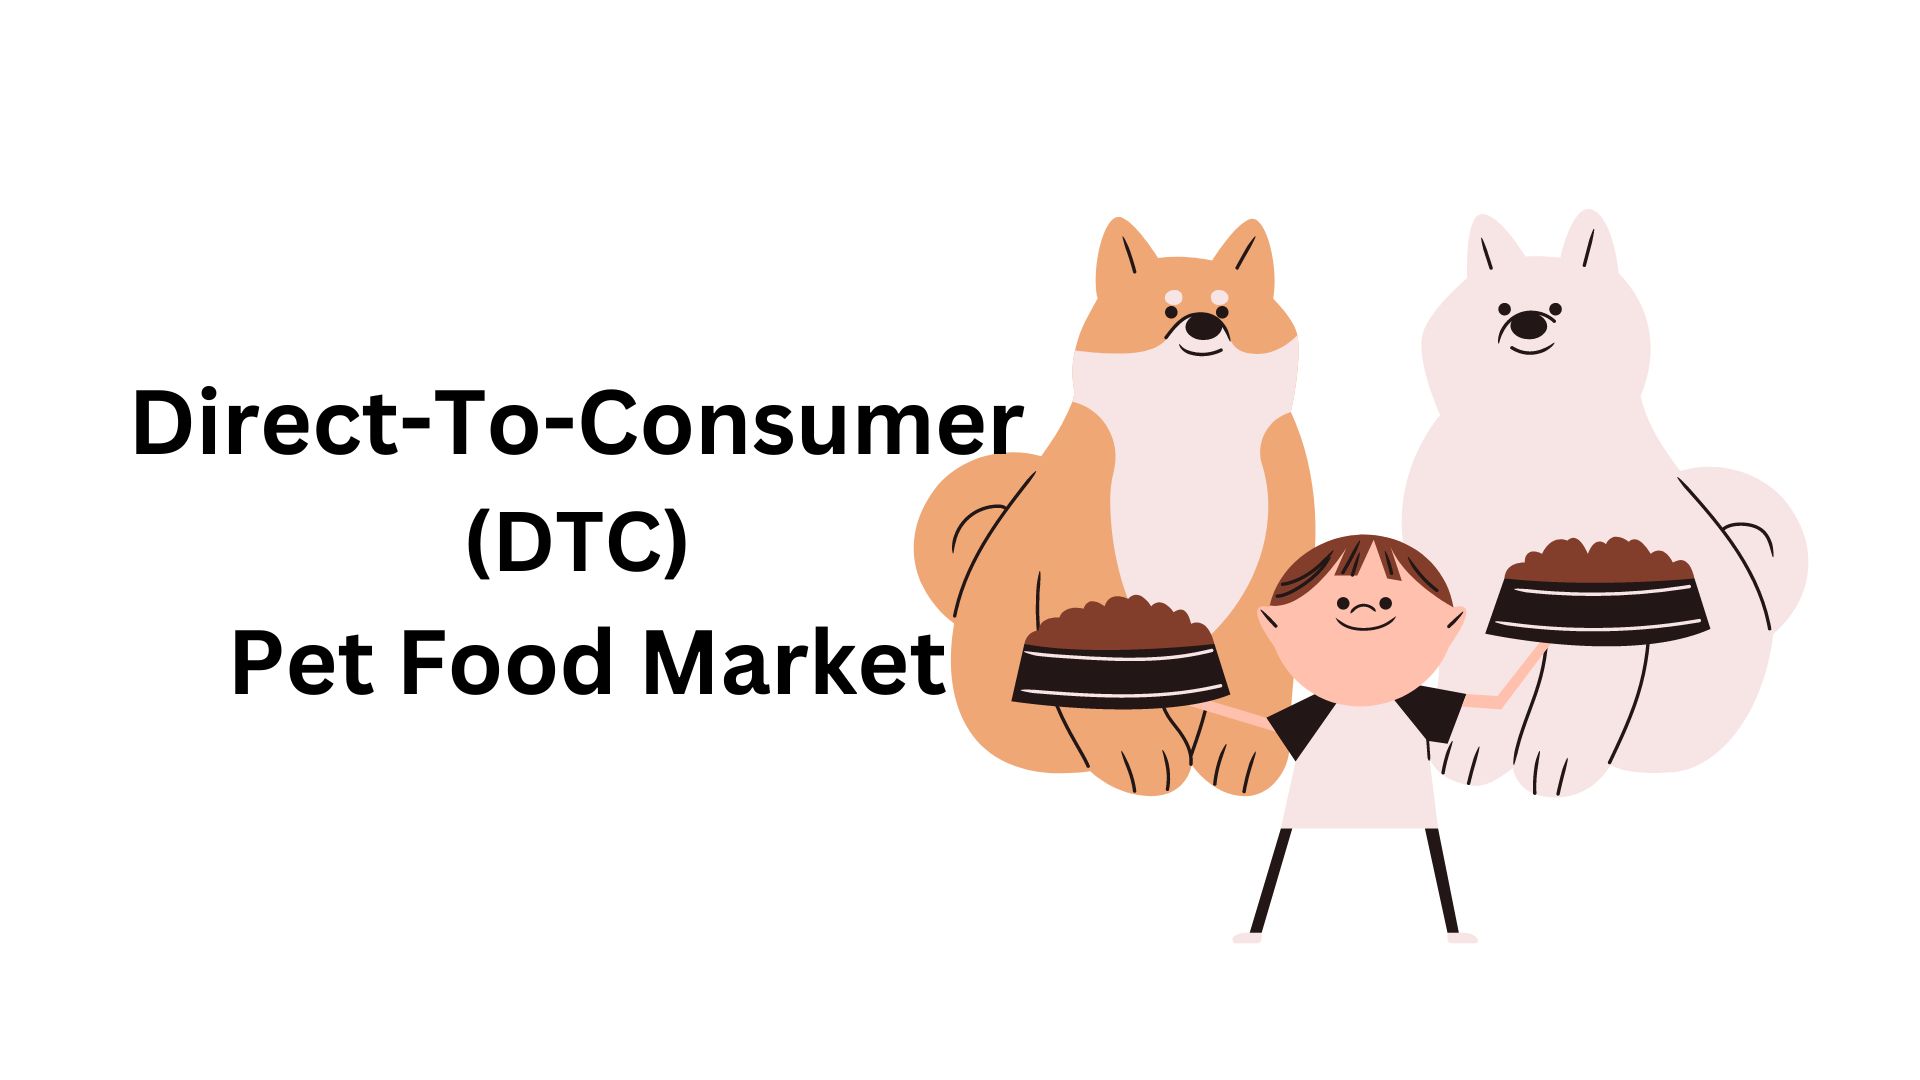 Direct-To-Consumer (DTC) Pet Food Market Sales to Top USD 18.6 BN by 2033, At a CAGR of 25.1% | Global Analysis by Market.us